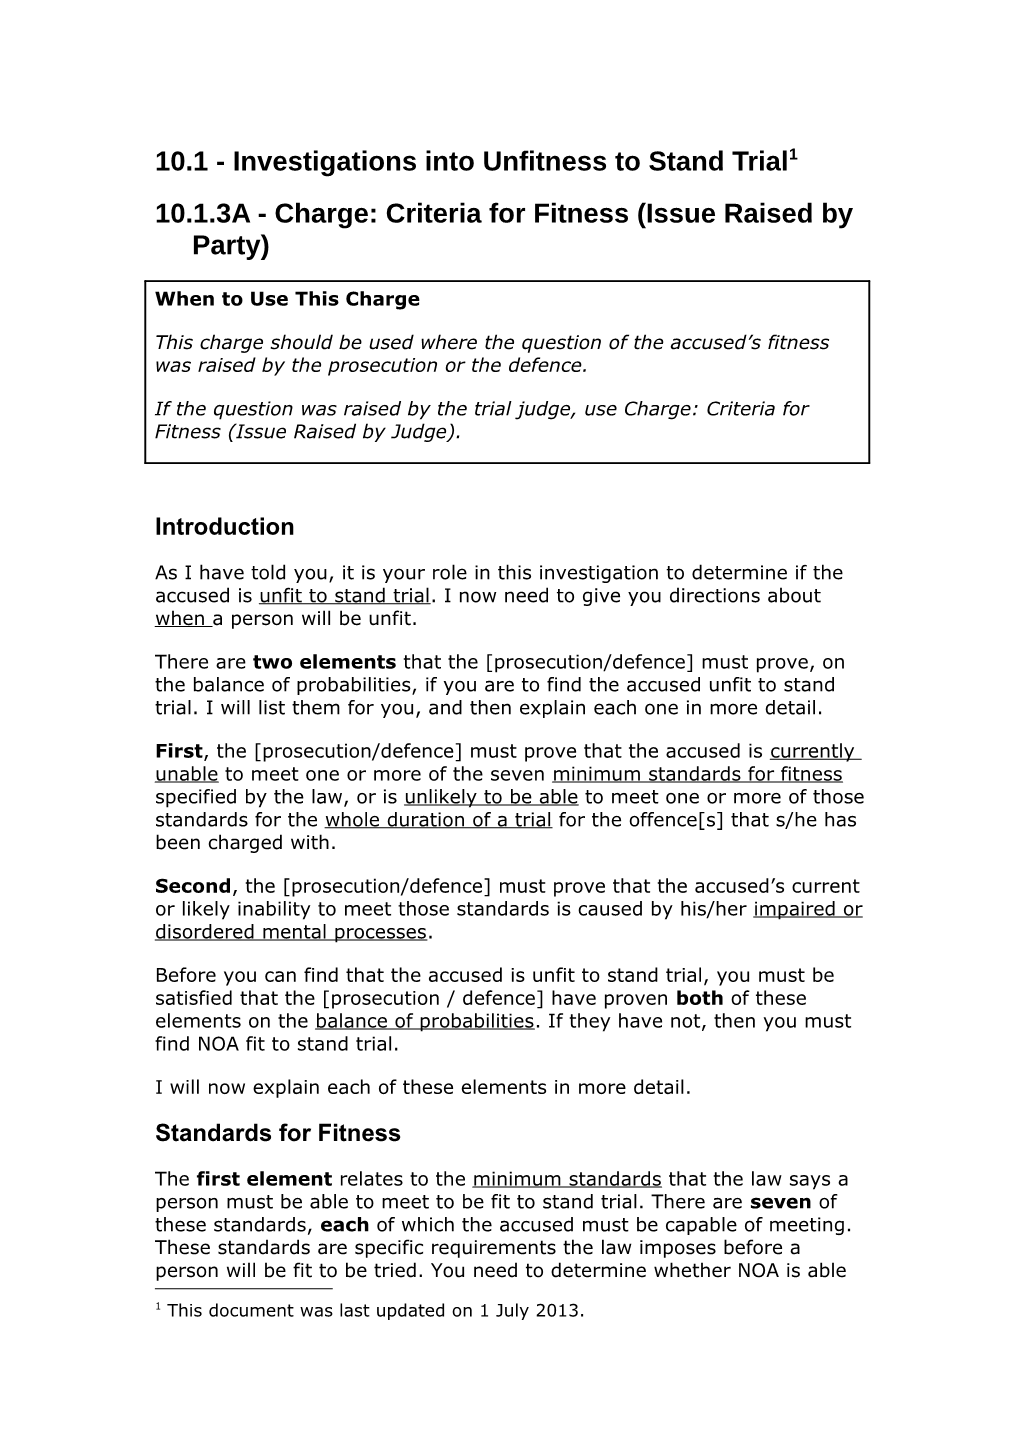 Charge: Criteria for Fitness